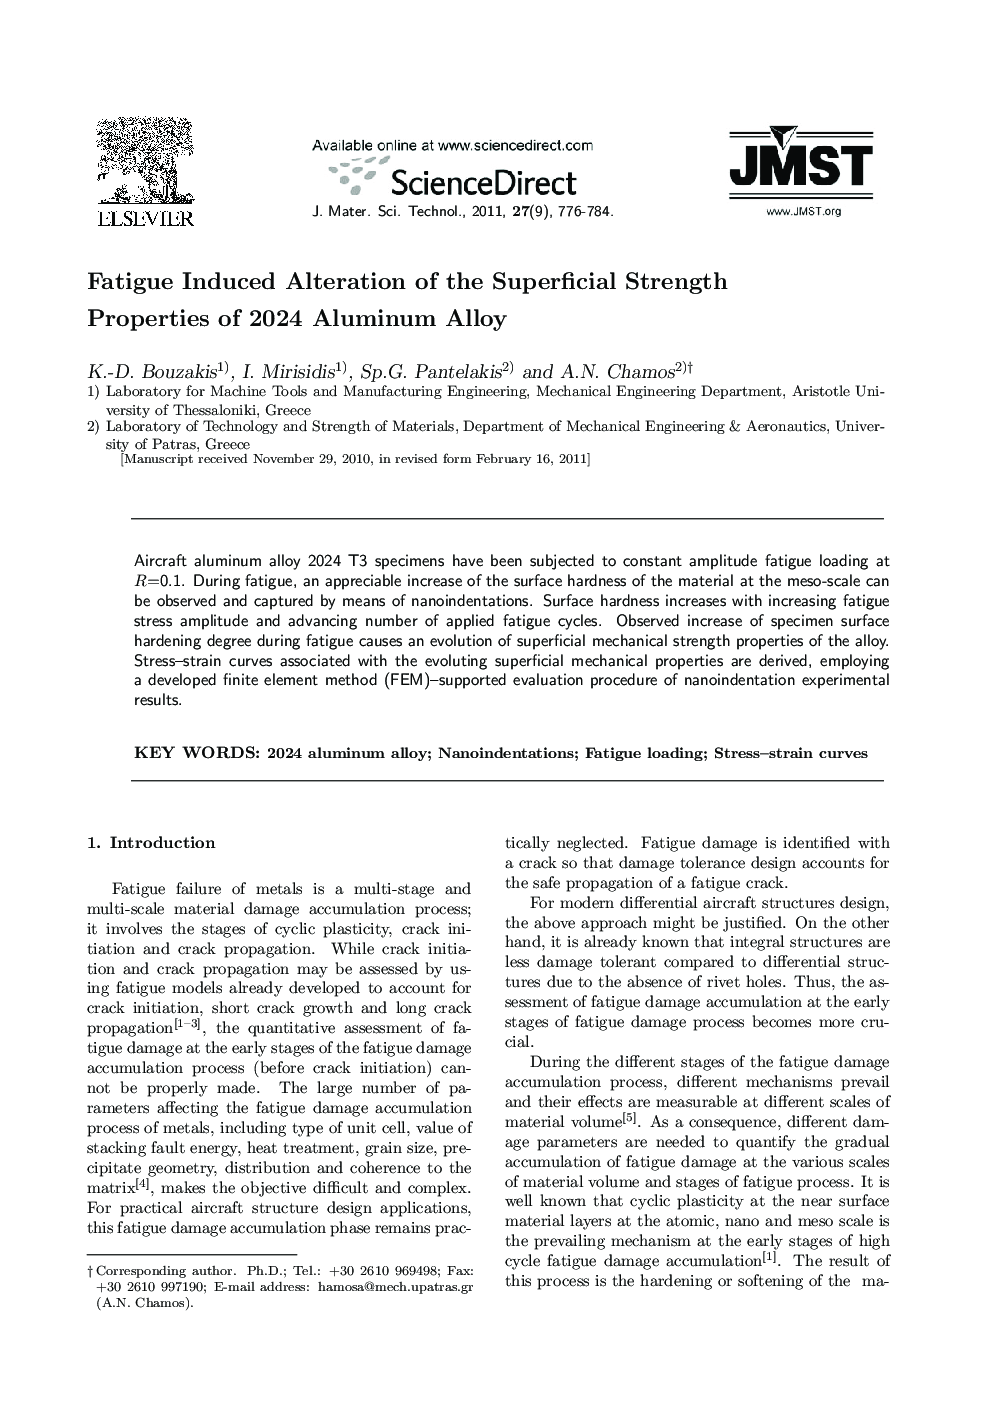 Fatigue Induced Alteration of the Superficial Strength Properties of 2024 Aluminum Alloy